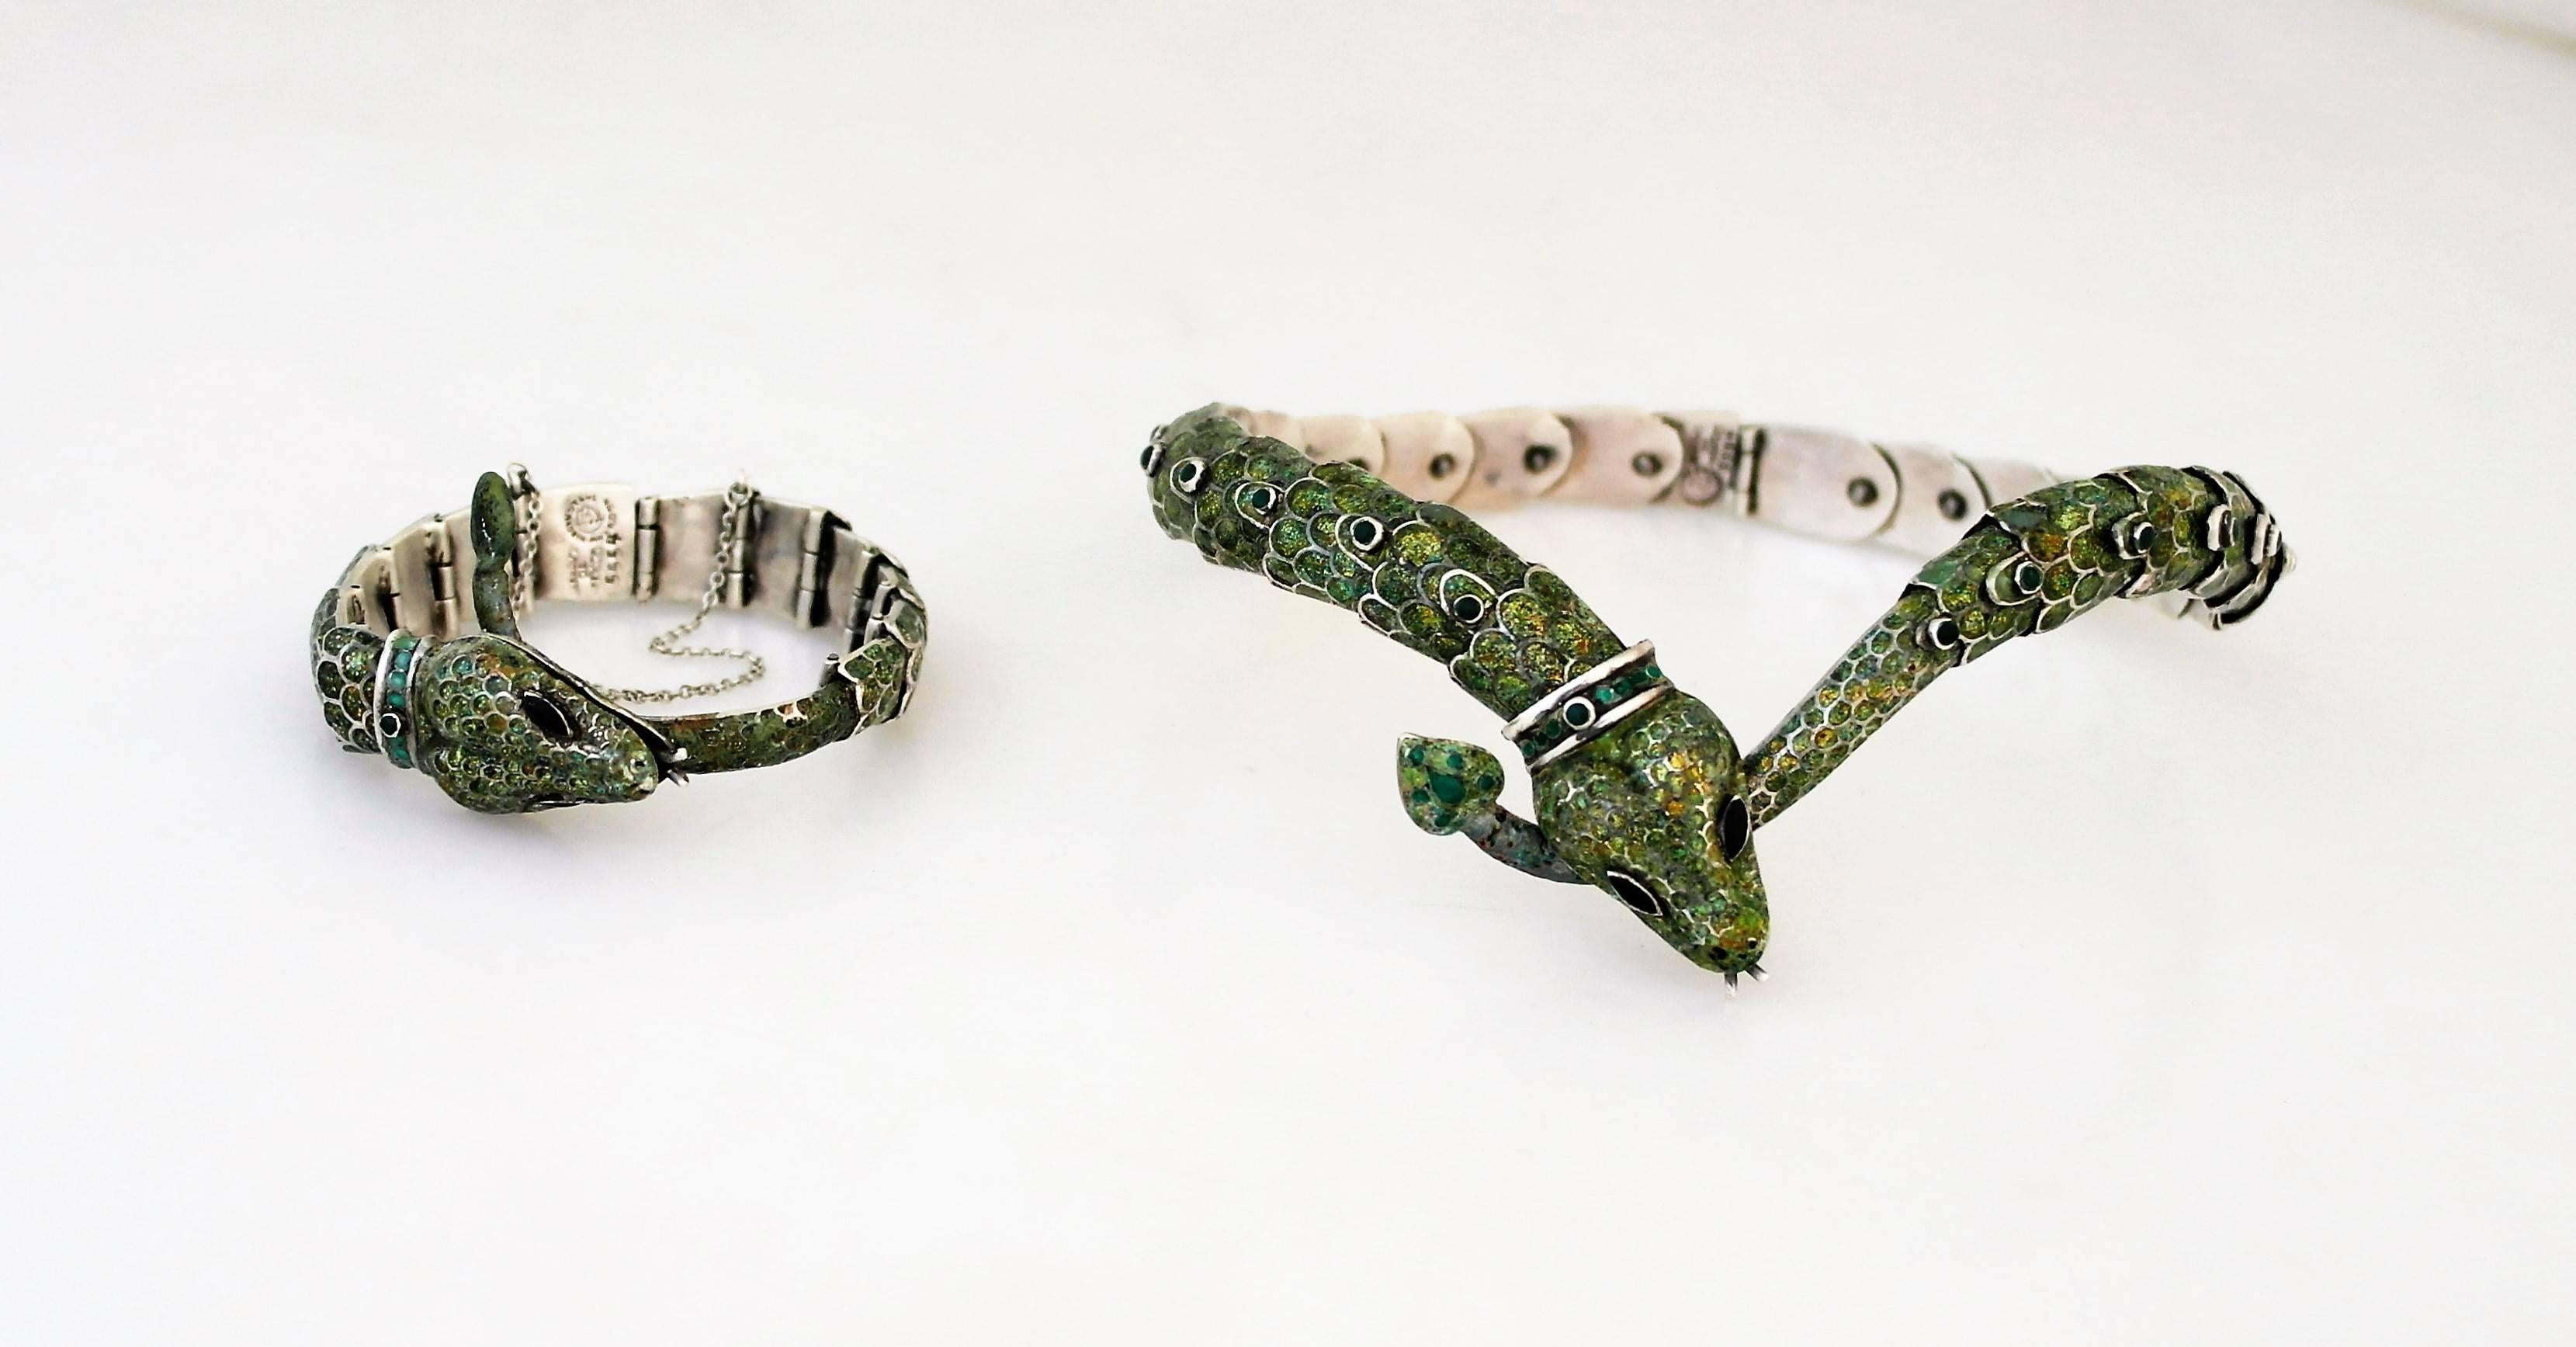 Being offered is a sterling silver jewelry suite by Margot Van Voorhies Carr of Taxco, Mexico. Comprising a necklace & bracelet in her snake motif, articulated in a spectrum of iridescent colors. Dimensions: Necklace - 14 1/2